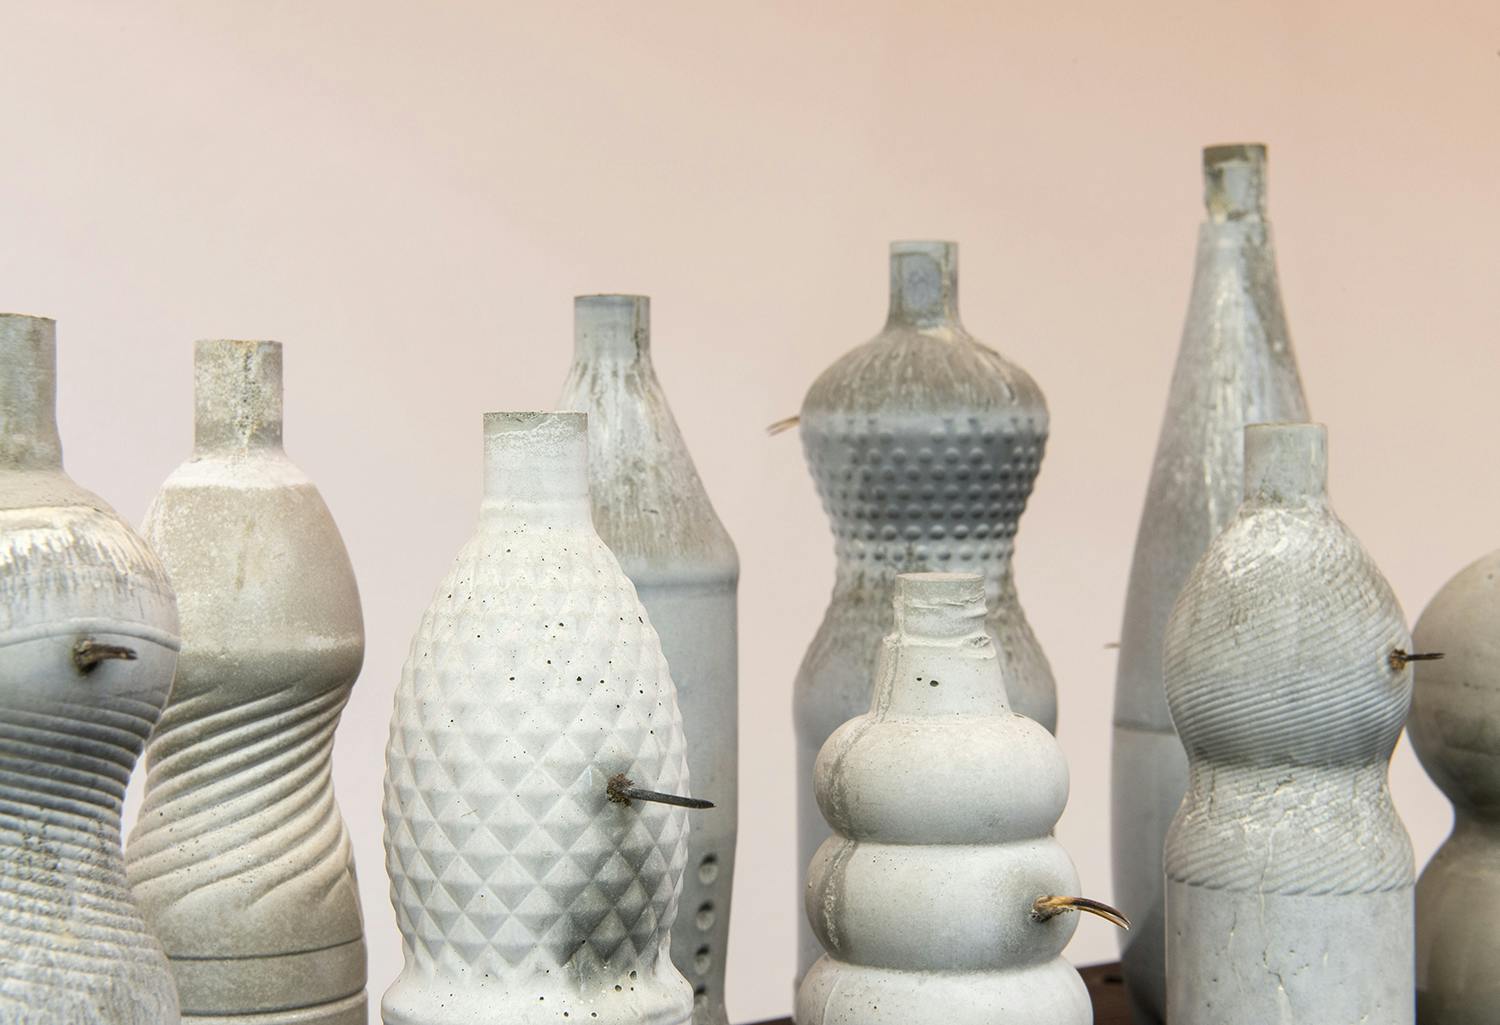 A detail of an art installation by Corbin Union. White ceramic bottles are placed on a white wooden surface. A beak-like metal piece is sticking out of each ceramic pieces. 